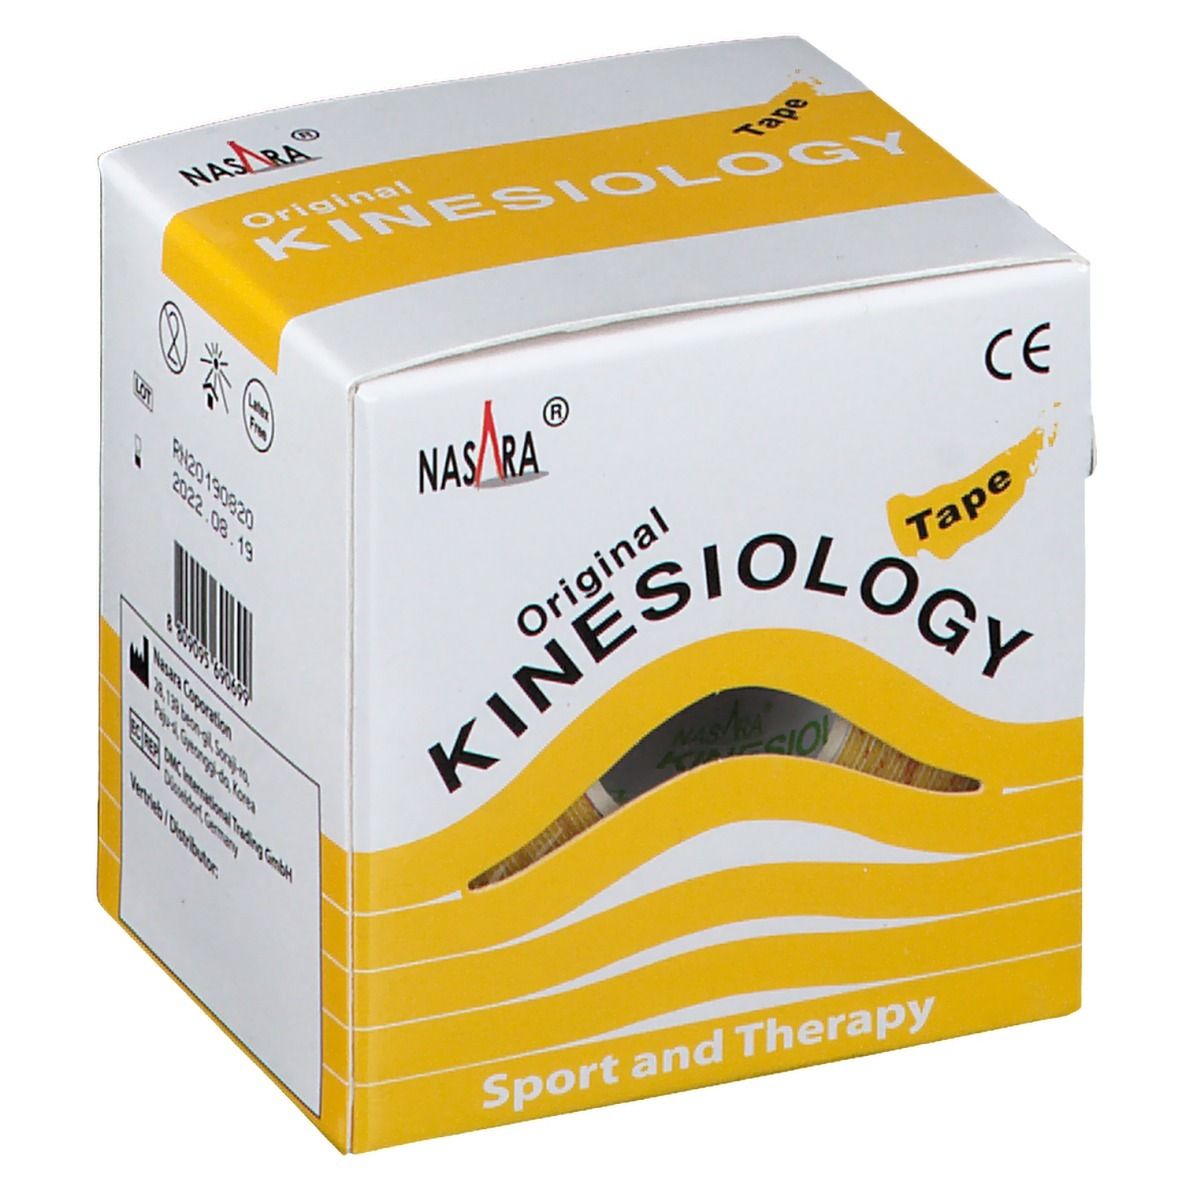 Nasara® Kinesiology-Tape classic 5 cm x 5 m Rolle Gelb